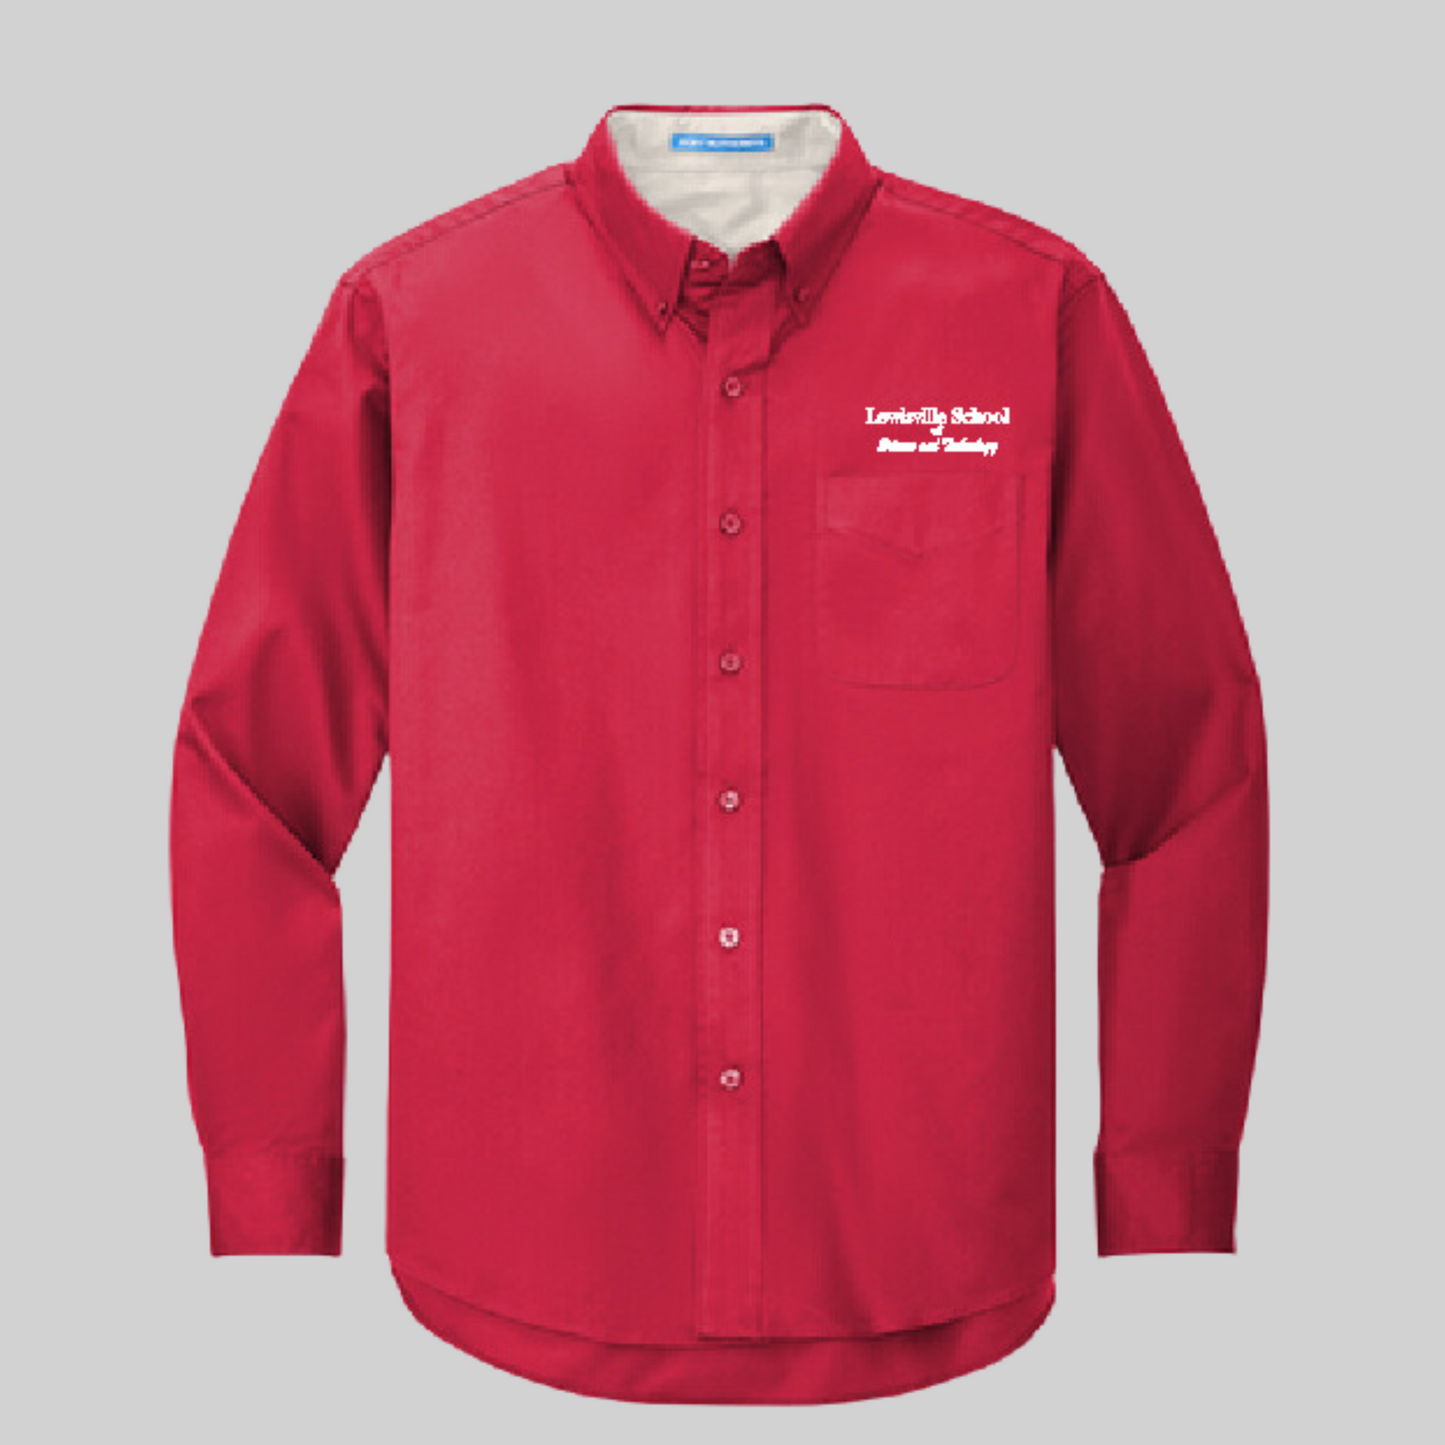 iSchool (Lewisville School of Science and Technology) Long Sleeve Business Shirt